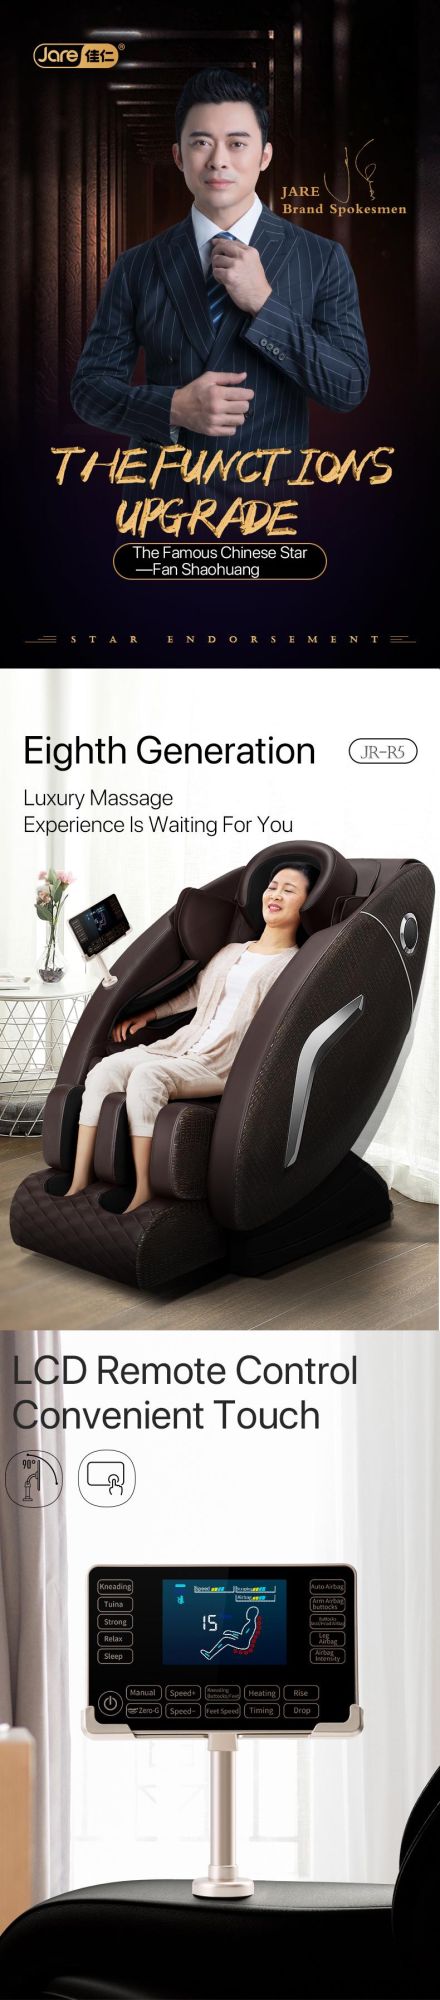 Home Multi-Functional SL Track Full Body 4D Massage Chair